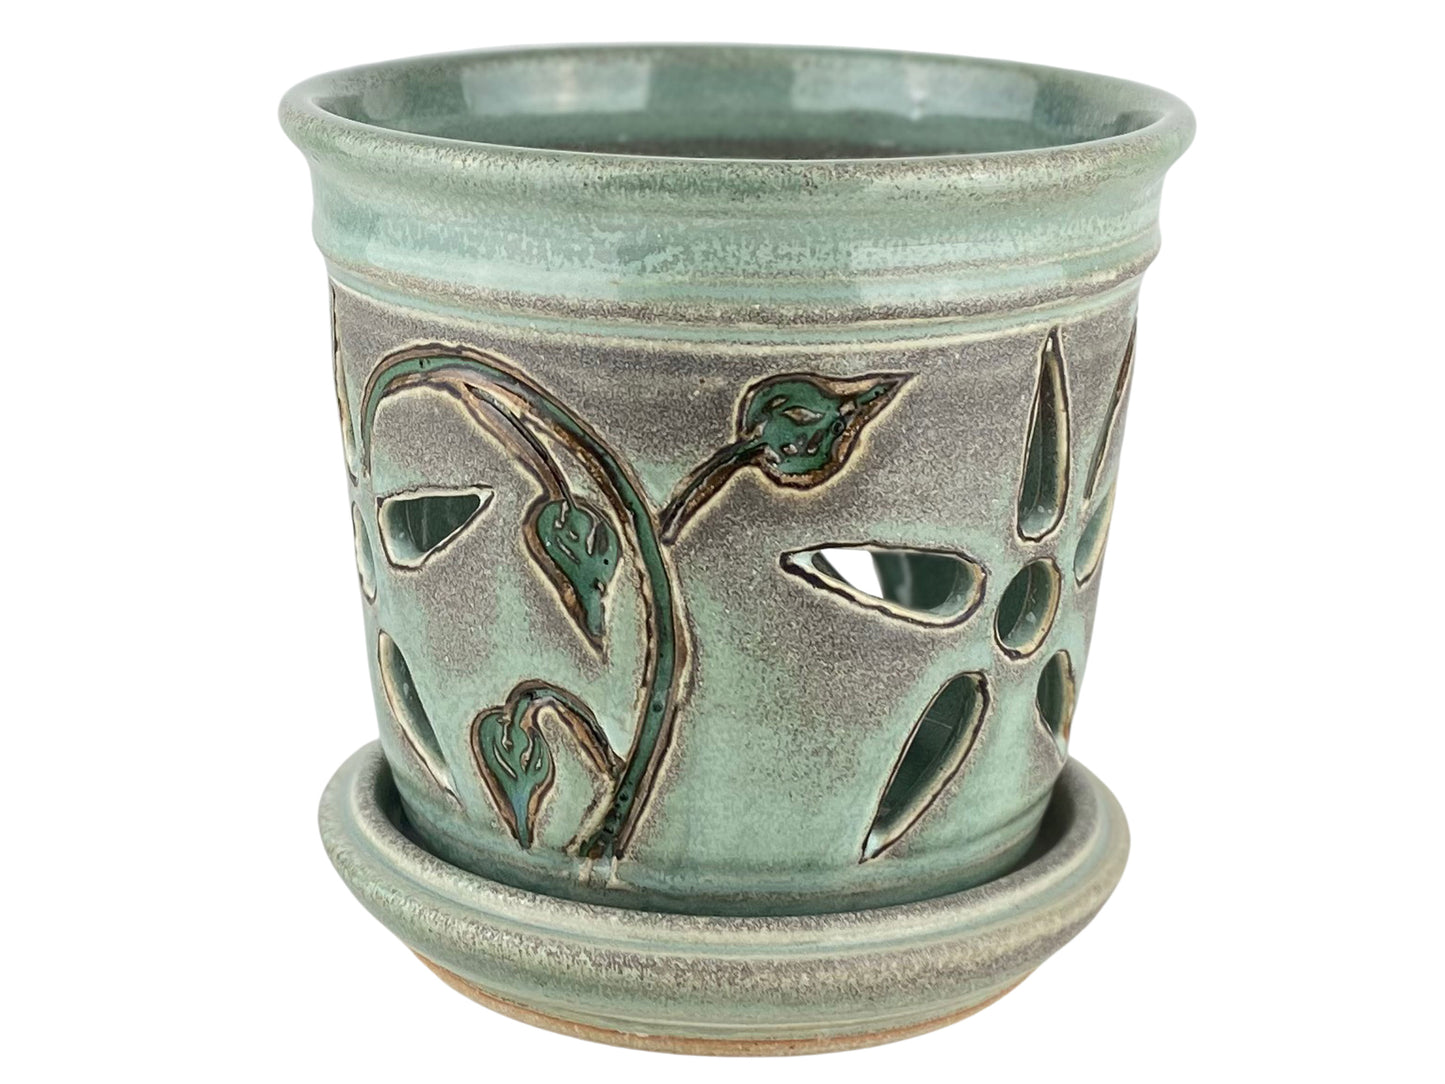 Stoneware Orchid Pot with Flower Design